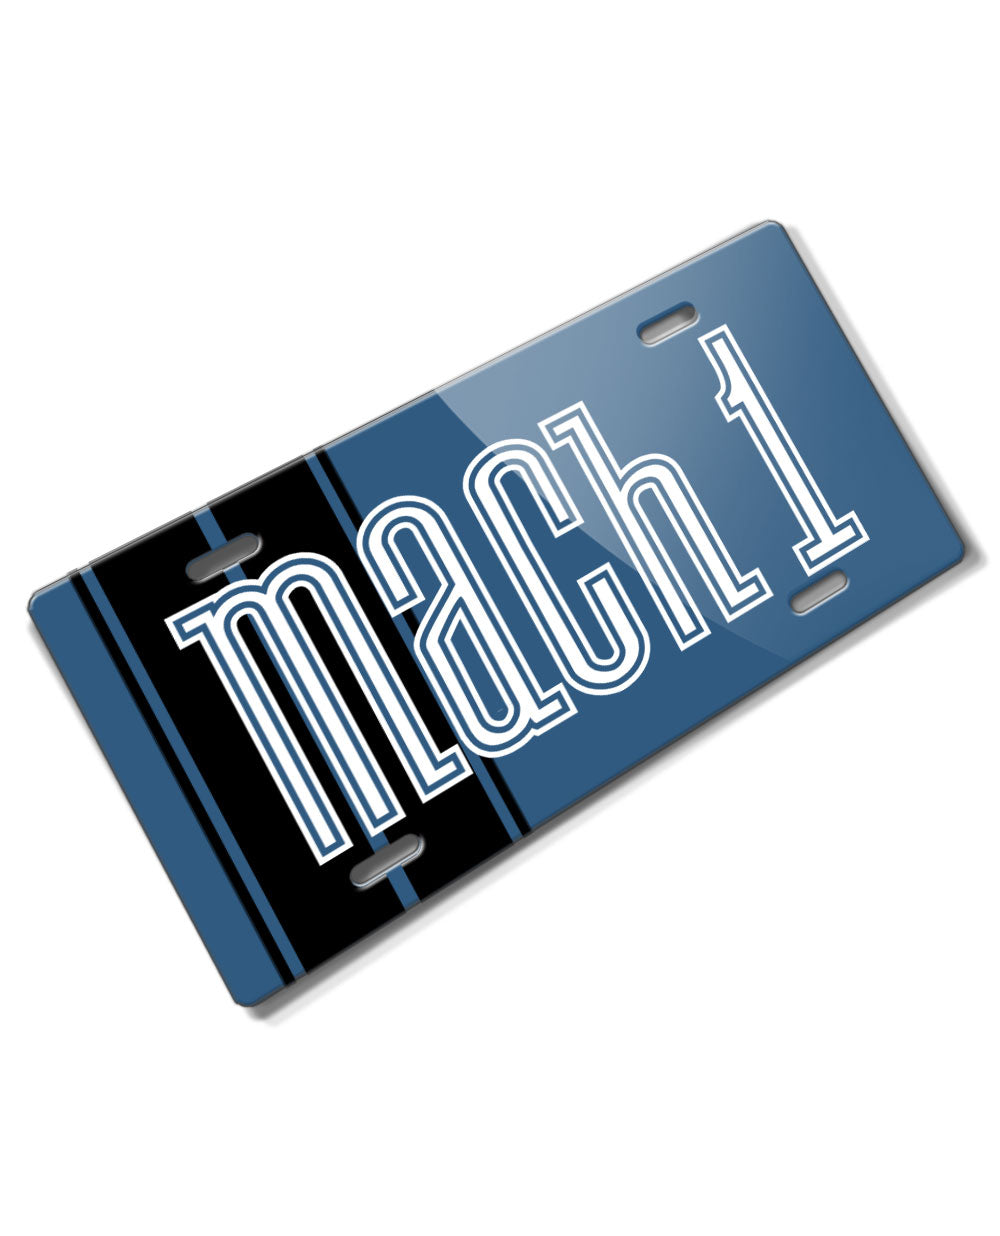 Ford Mustang Mach 1 Emblem Novelty License Plate